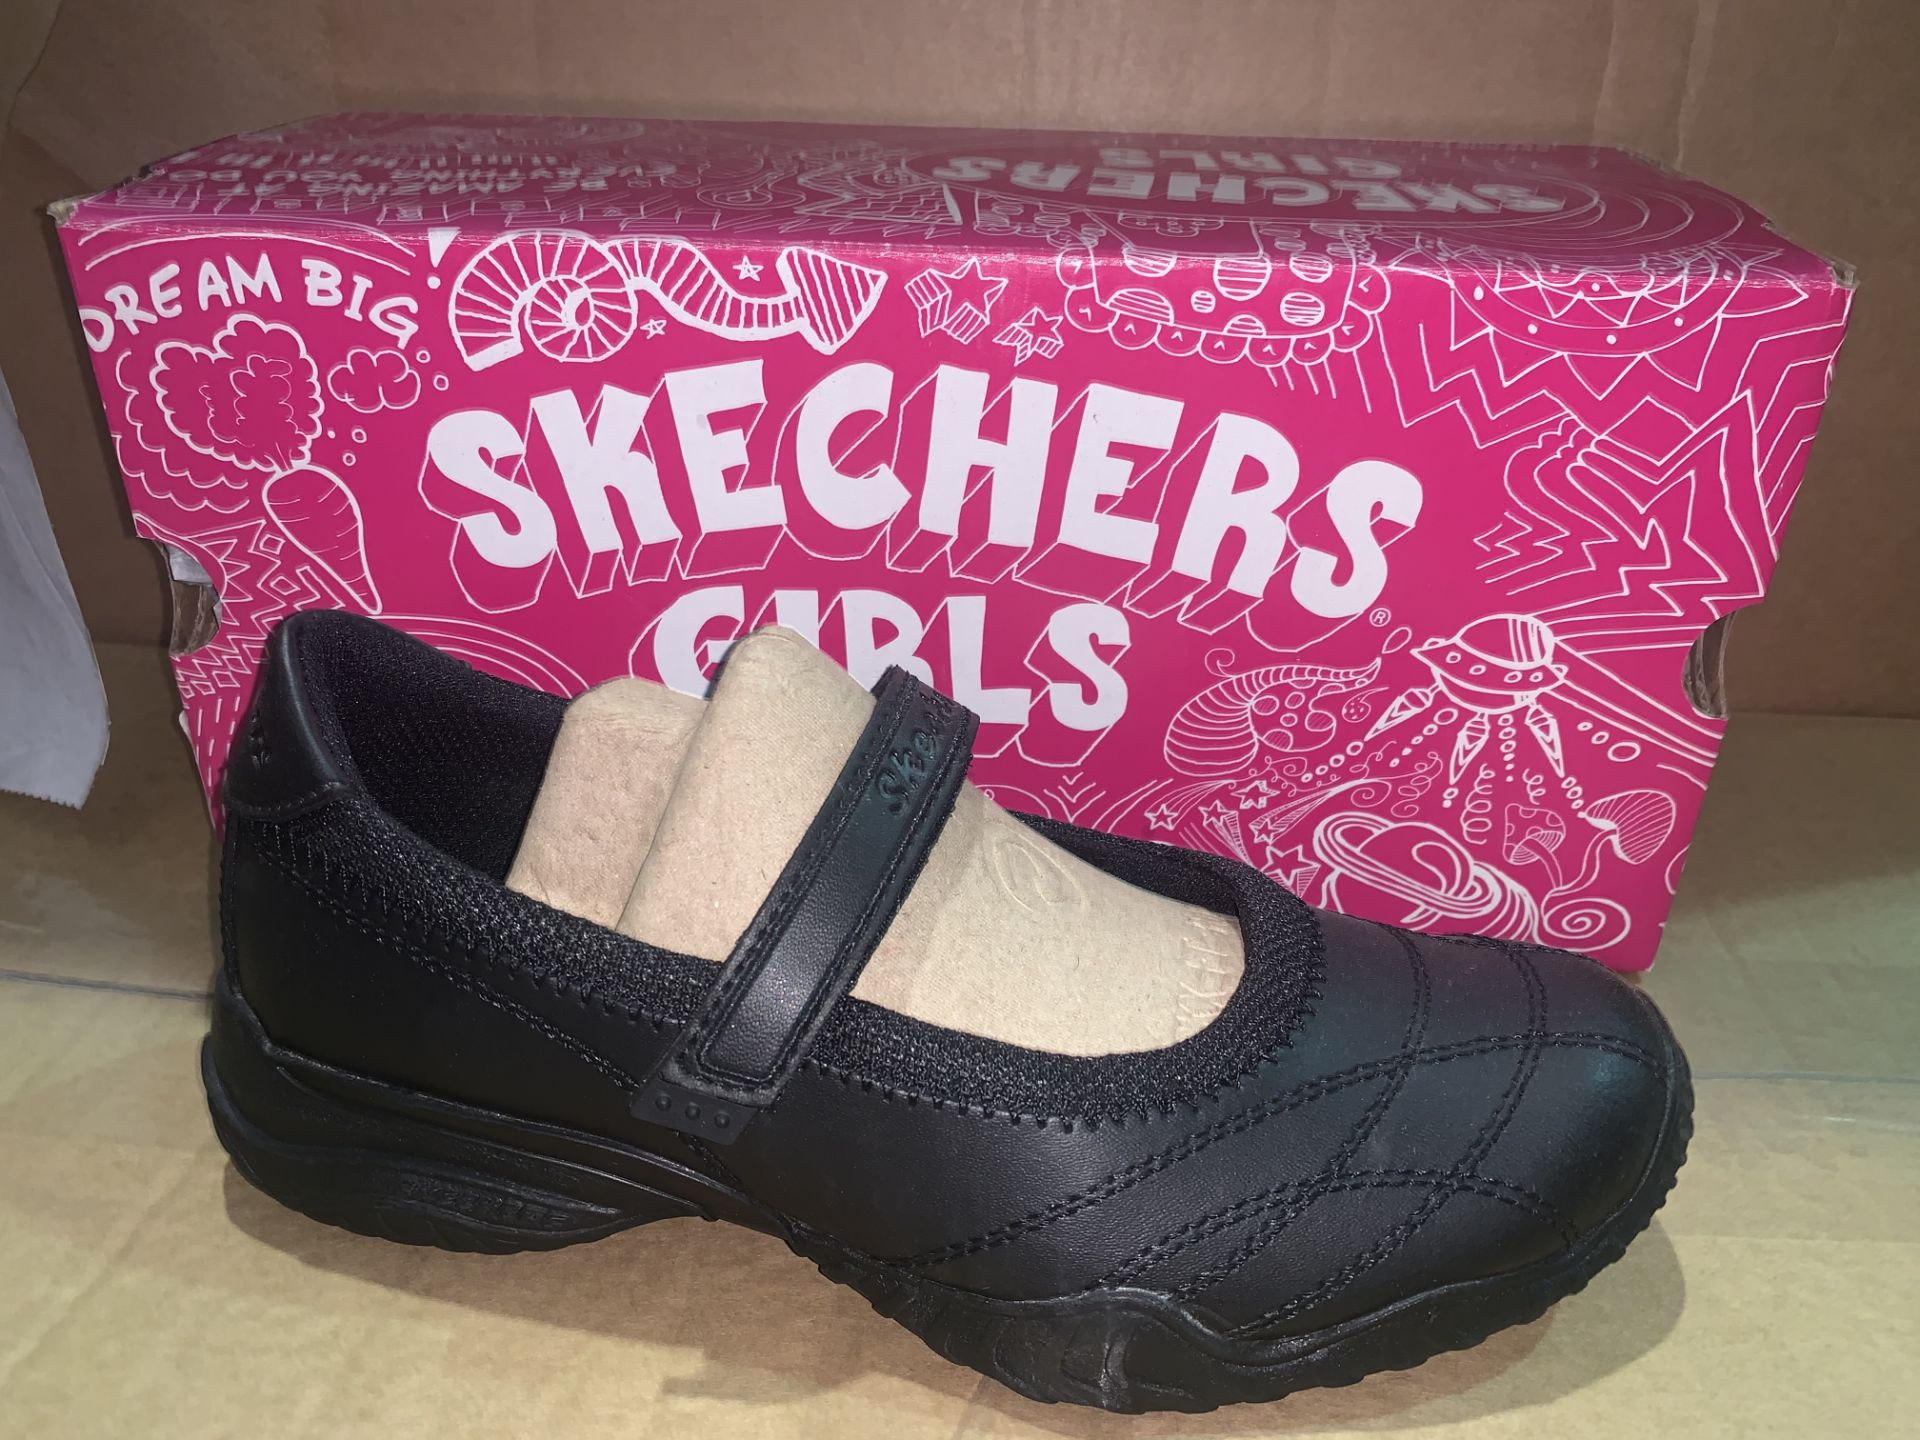 (NO VAT) 5 x NEW BOXED PAIRS OF SKETCHERS GIRLD BLACK POUTY SHOES. SIZE UK 2